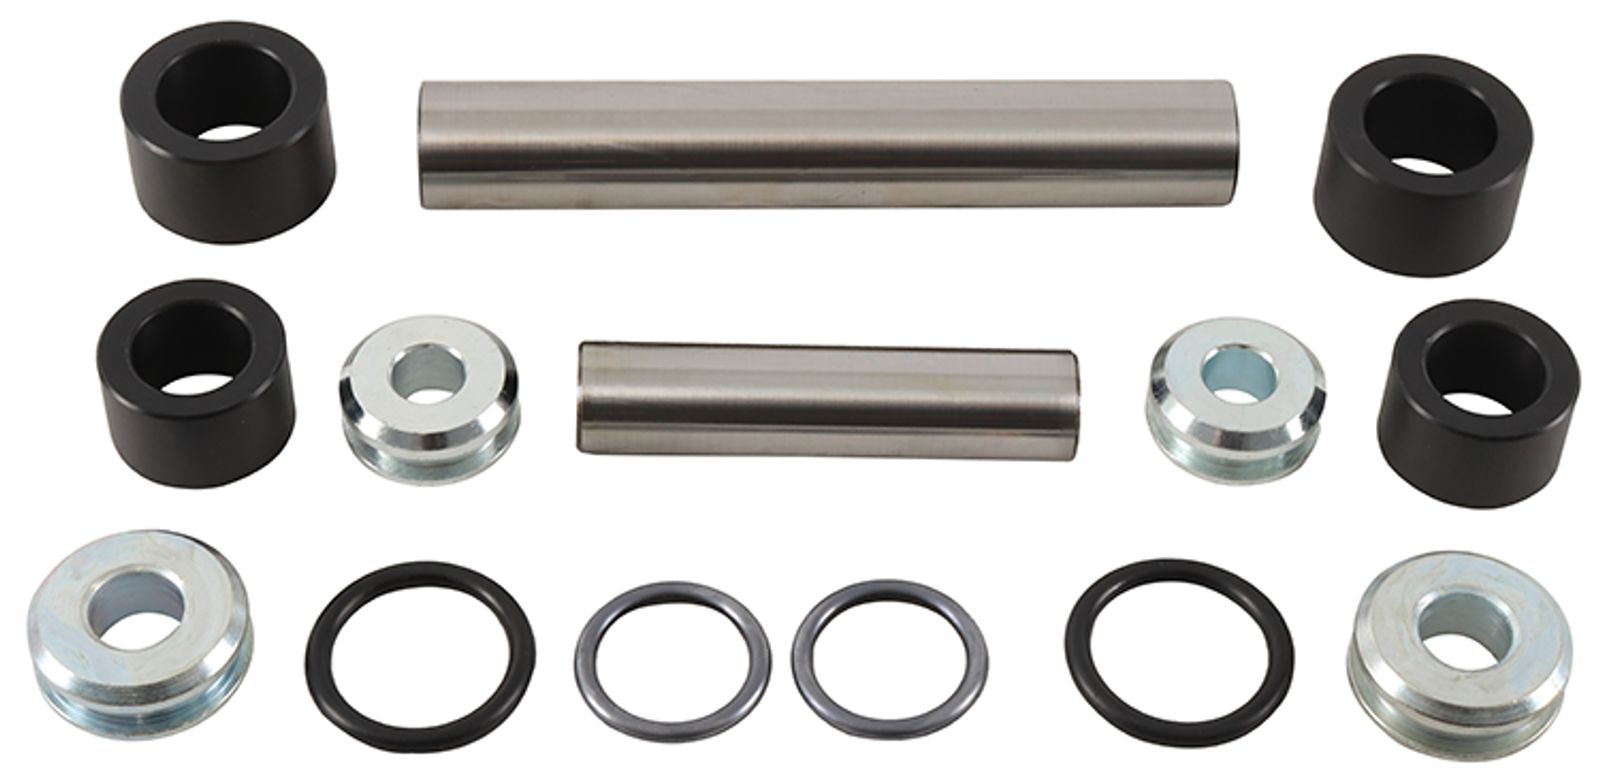 Wrp Rear Ind. Suspension Kits - WRP501216 image